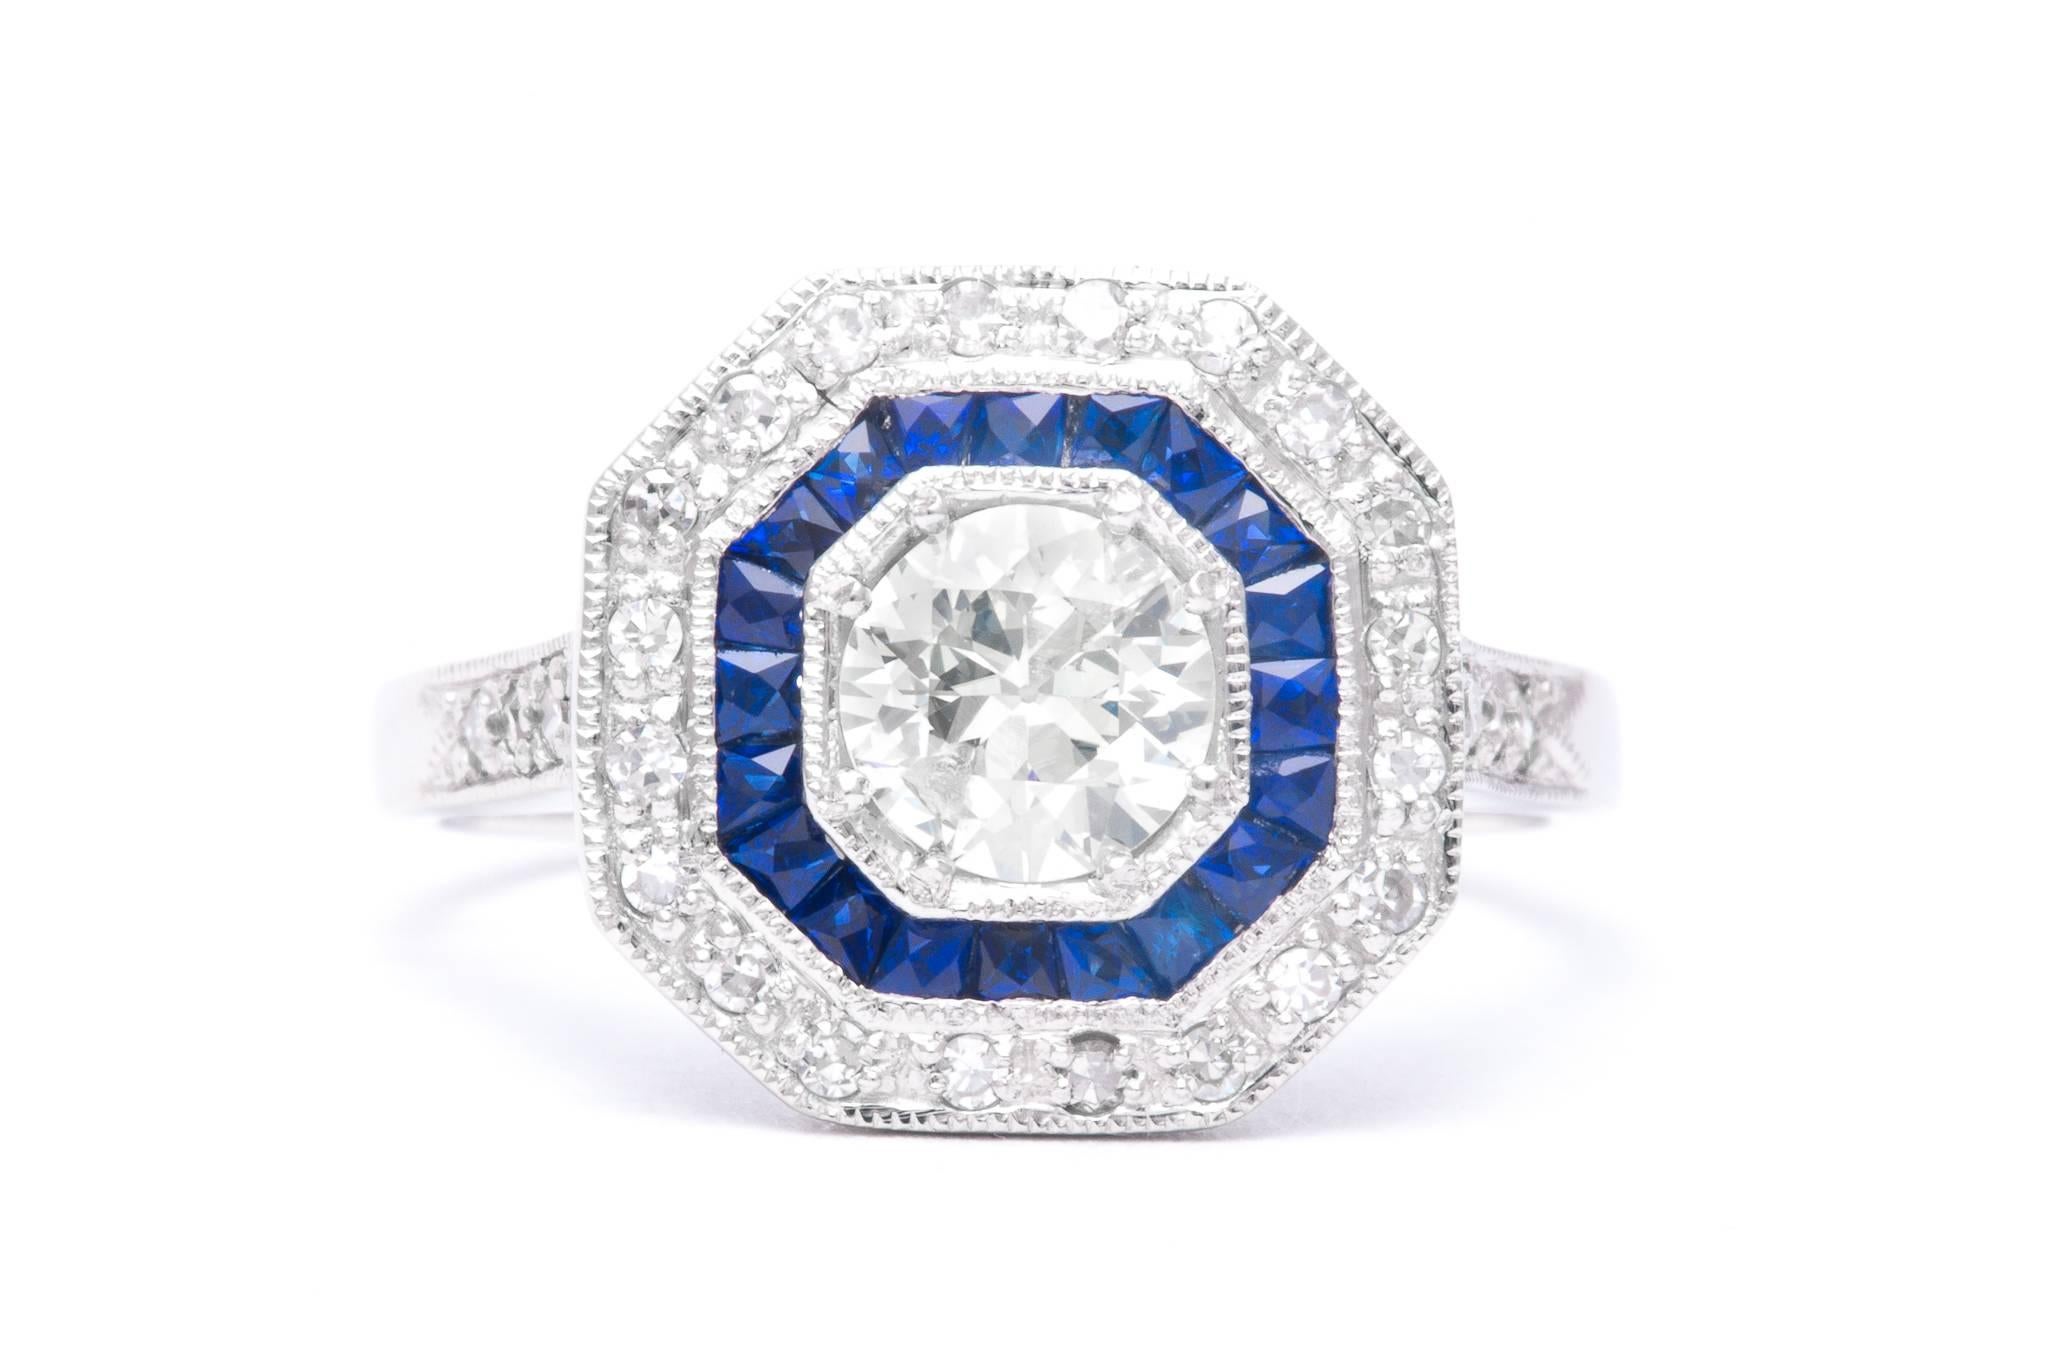 An exceptionally beautiful french cut sapphire and diamond ring in luxurious platinum. Featuring beautiful French cut sapphires, sparkling single cut and antique mine cut diamonds, and hand applied mille grain beading, this ring is a truly stunning